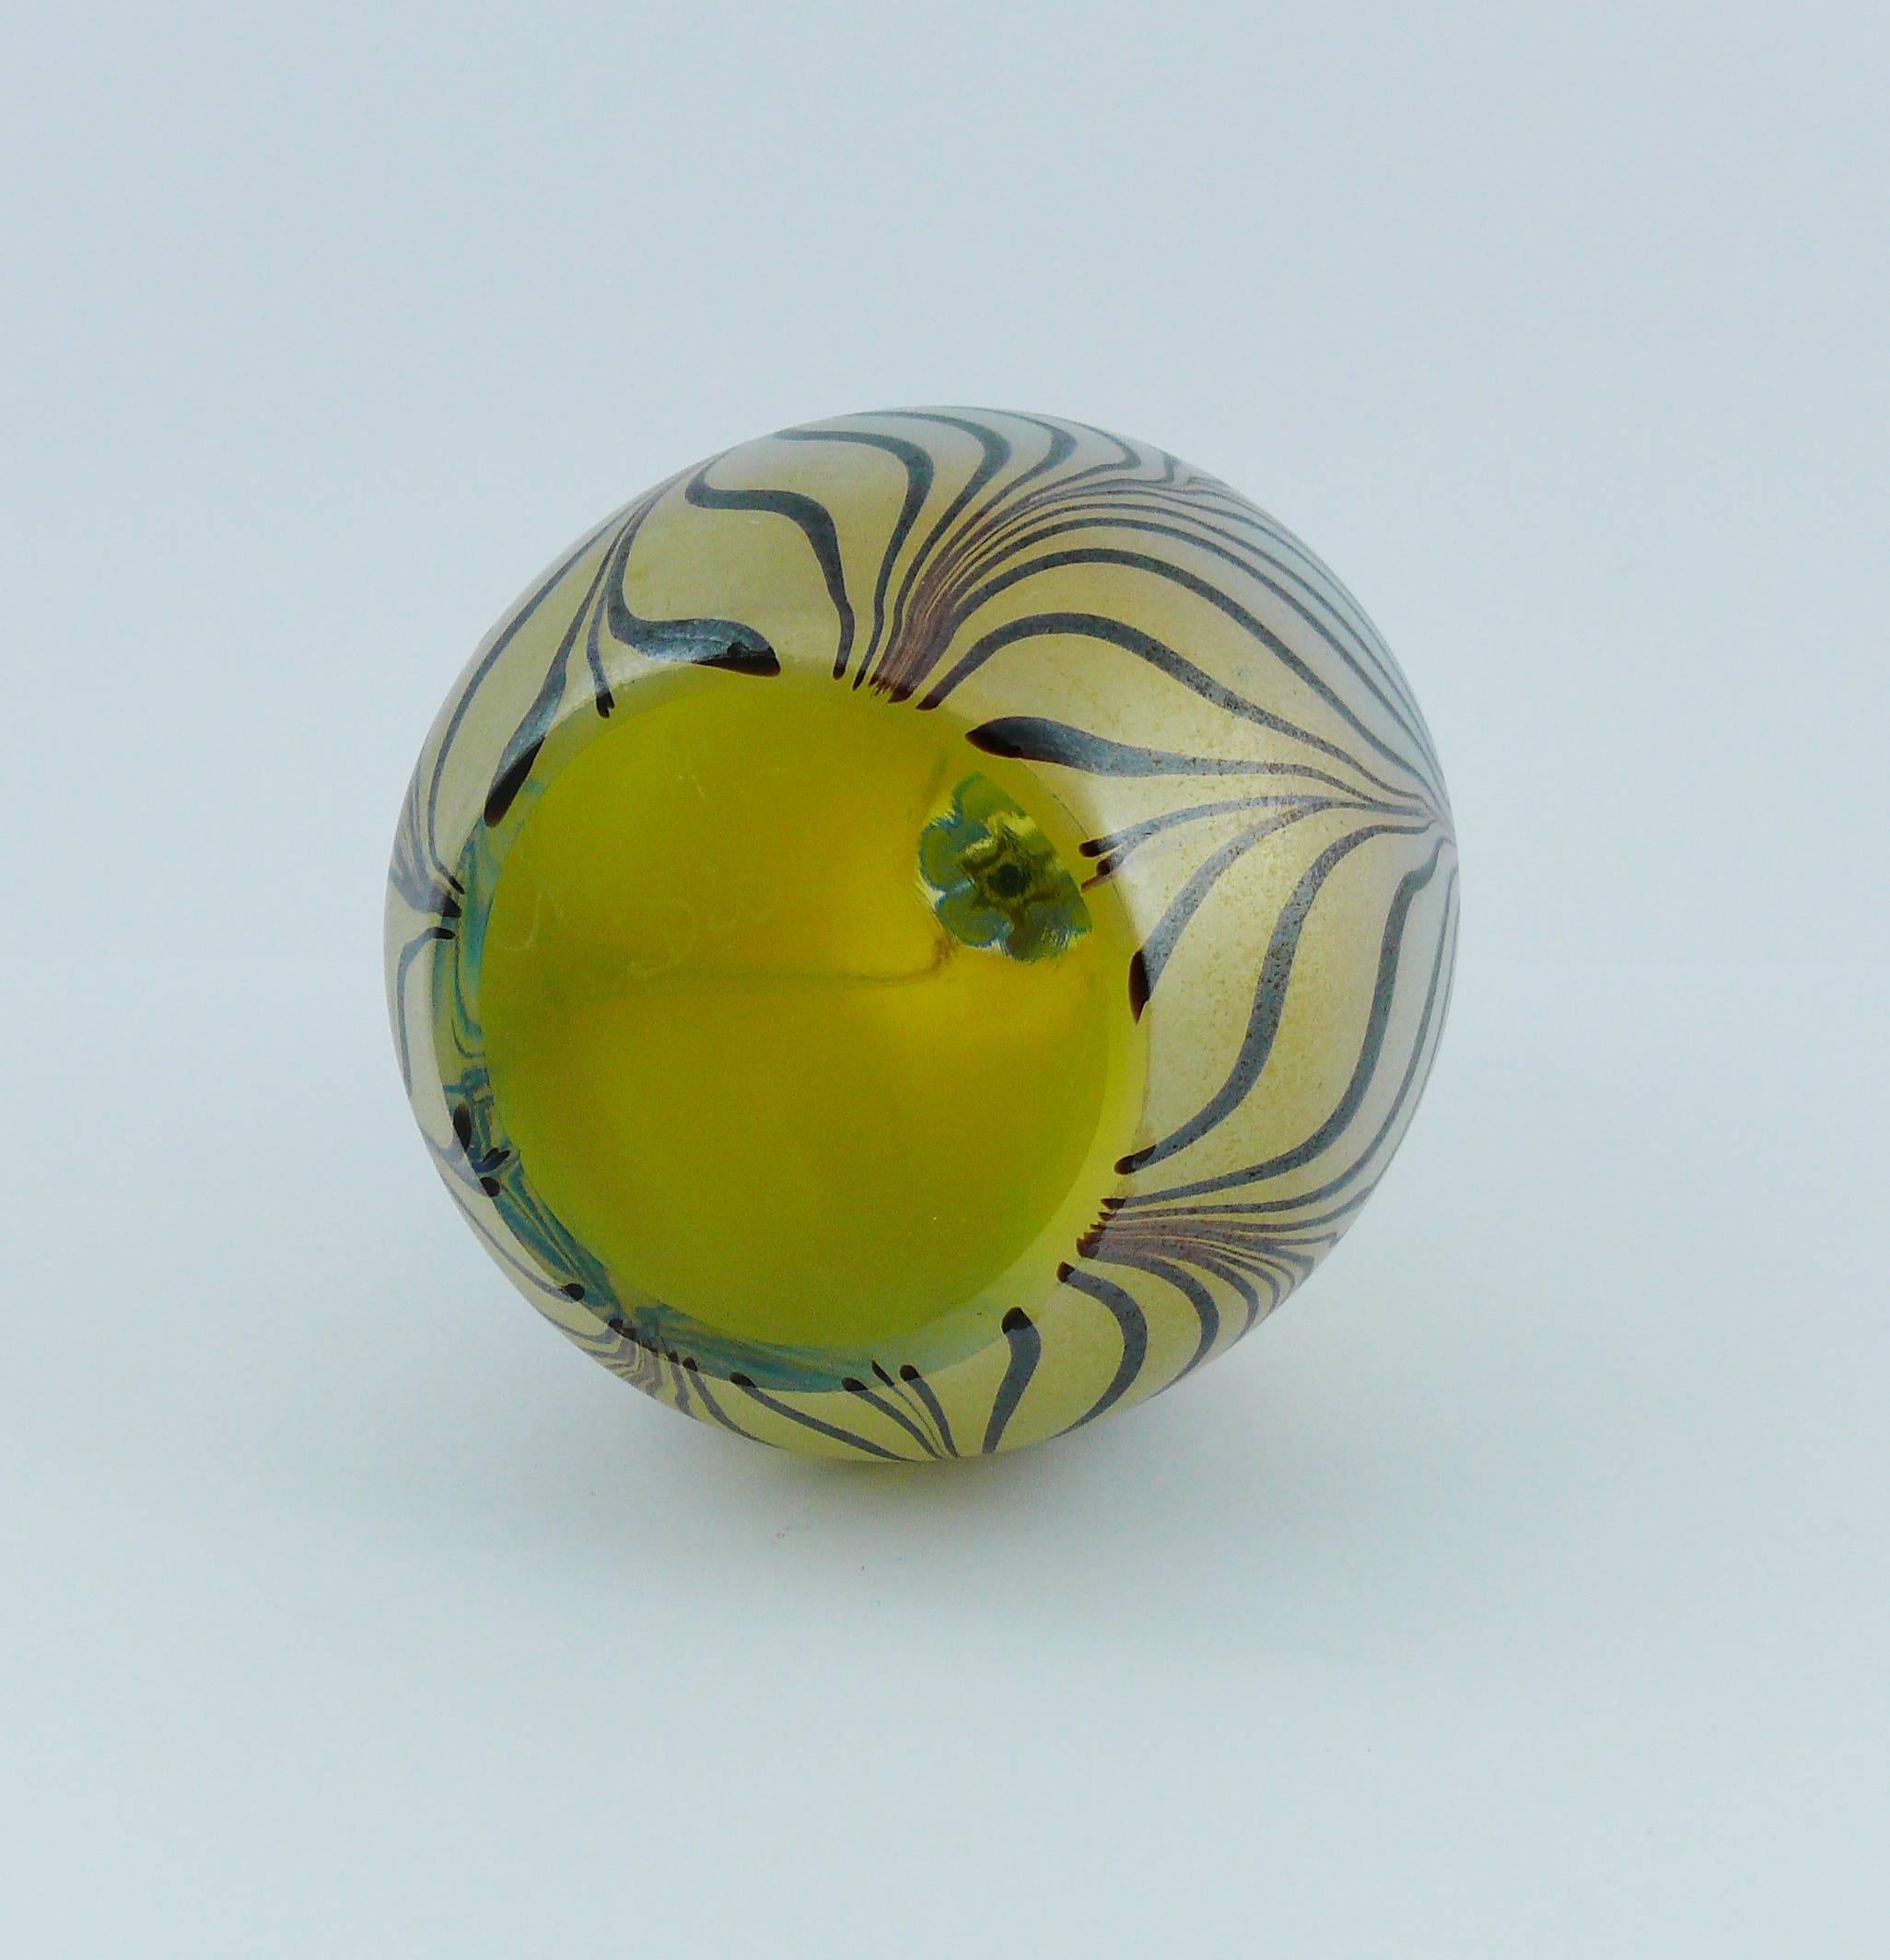 Gray Christian Dior Vintage Murano Art Glass Egg Paperweight 